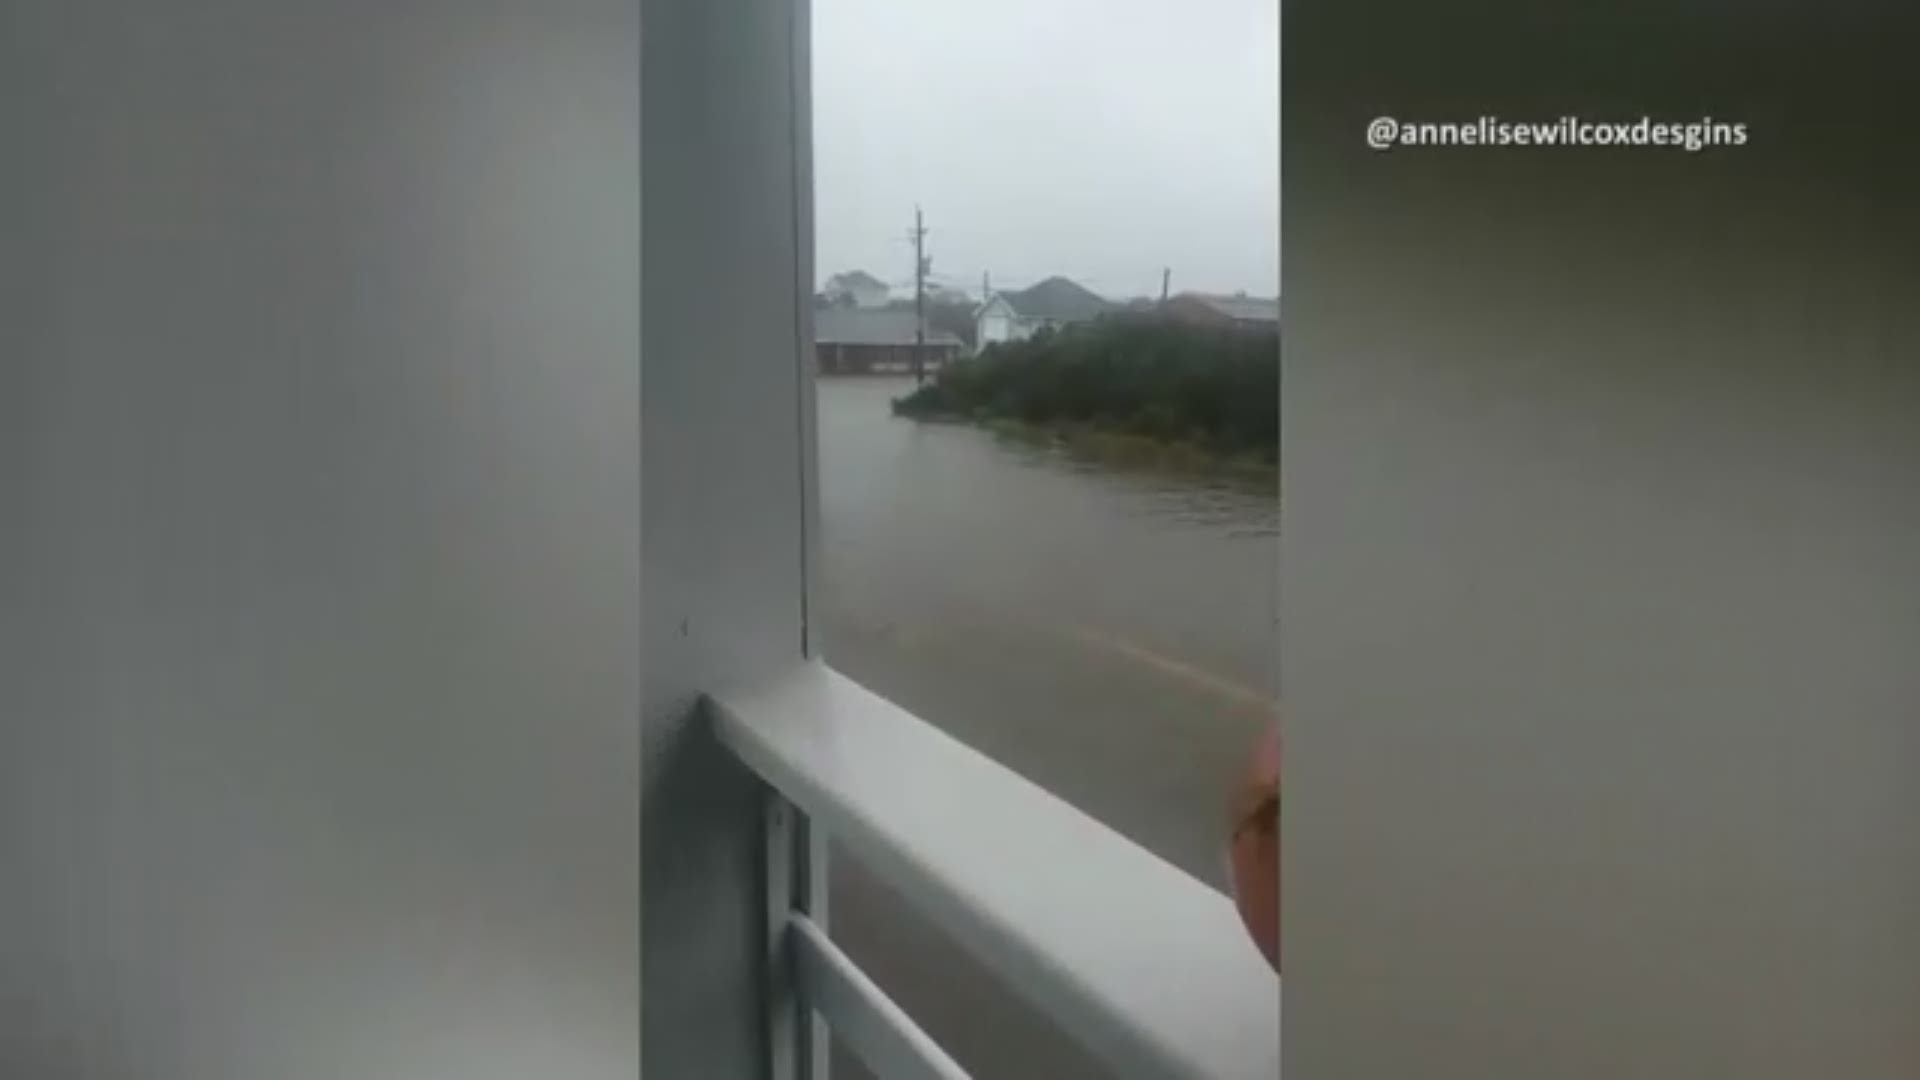 Hurricane Dorian's wind and rain bands slammed the Outer Banks Friday. The storm made landfall on Cape Hatteras, North Carolina at 8:35am ET. Ocracoke, at the beginning of the Outer Banks, experienced extreme flooding due to storm surge and the intensity of the storm.